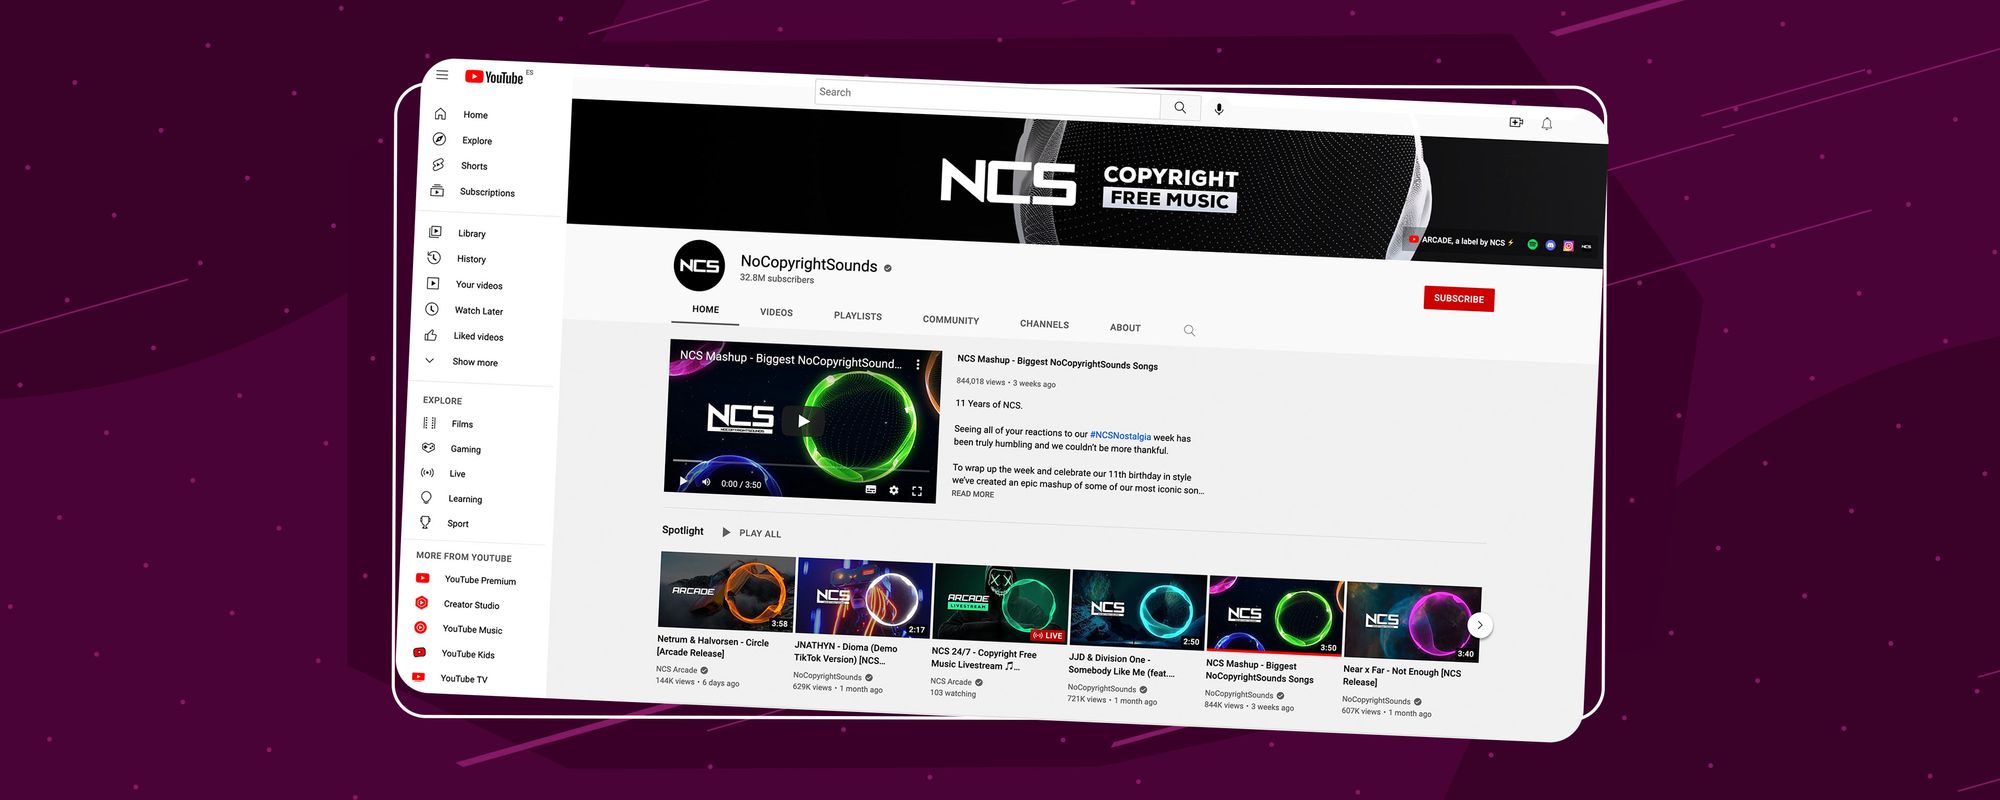 The NoCopyrightSounds channel on YouTube